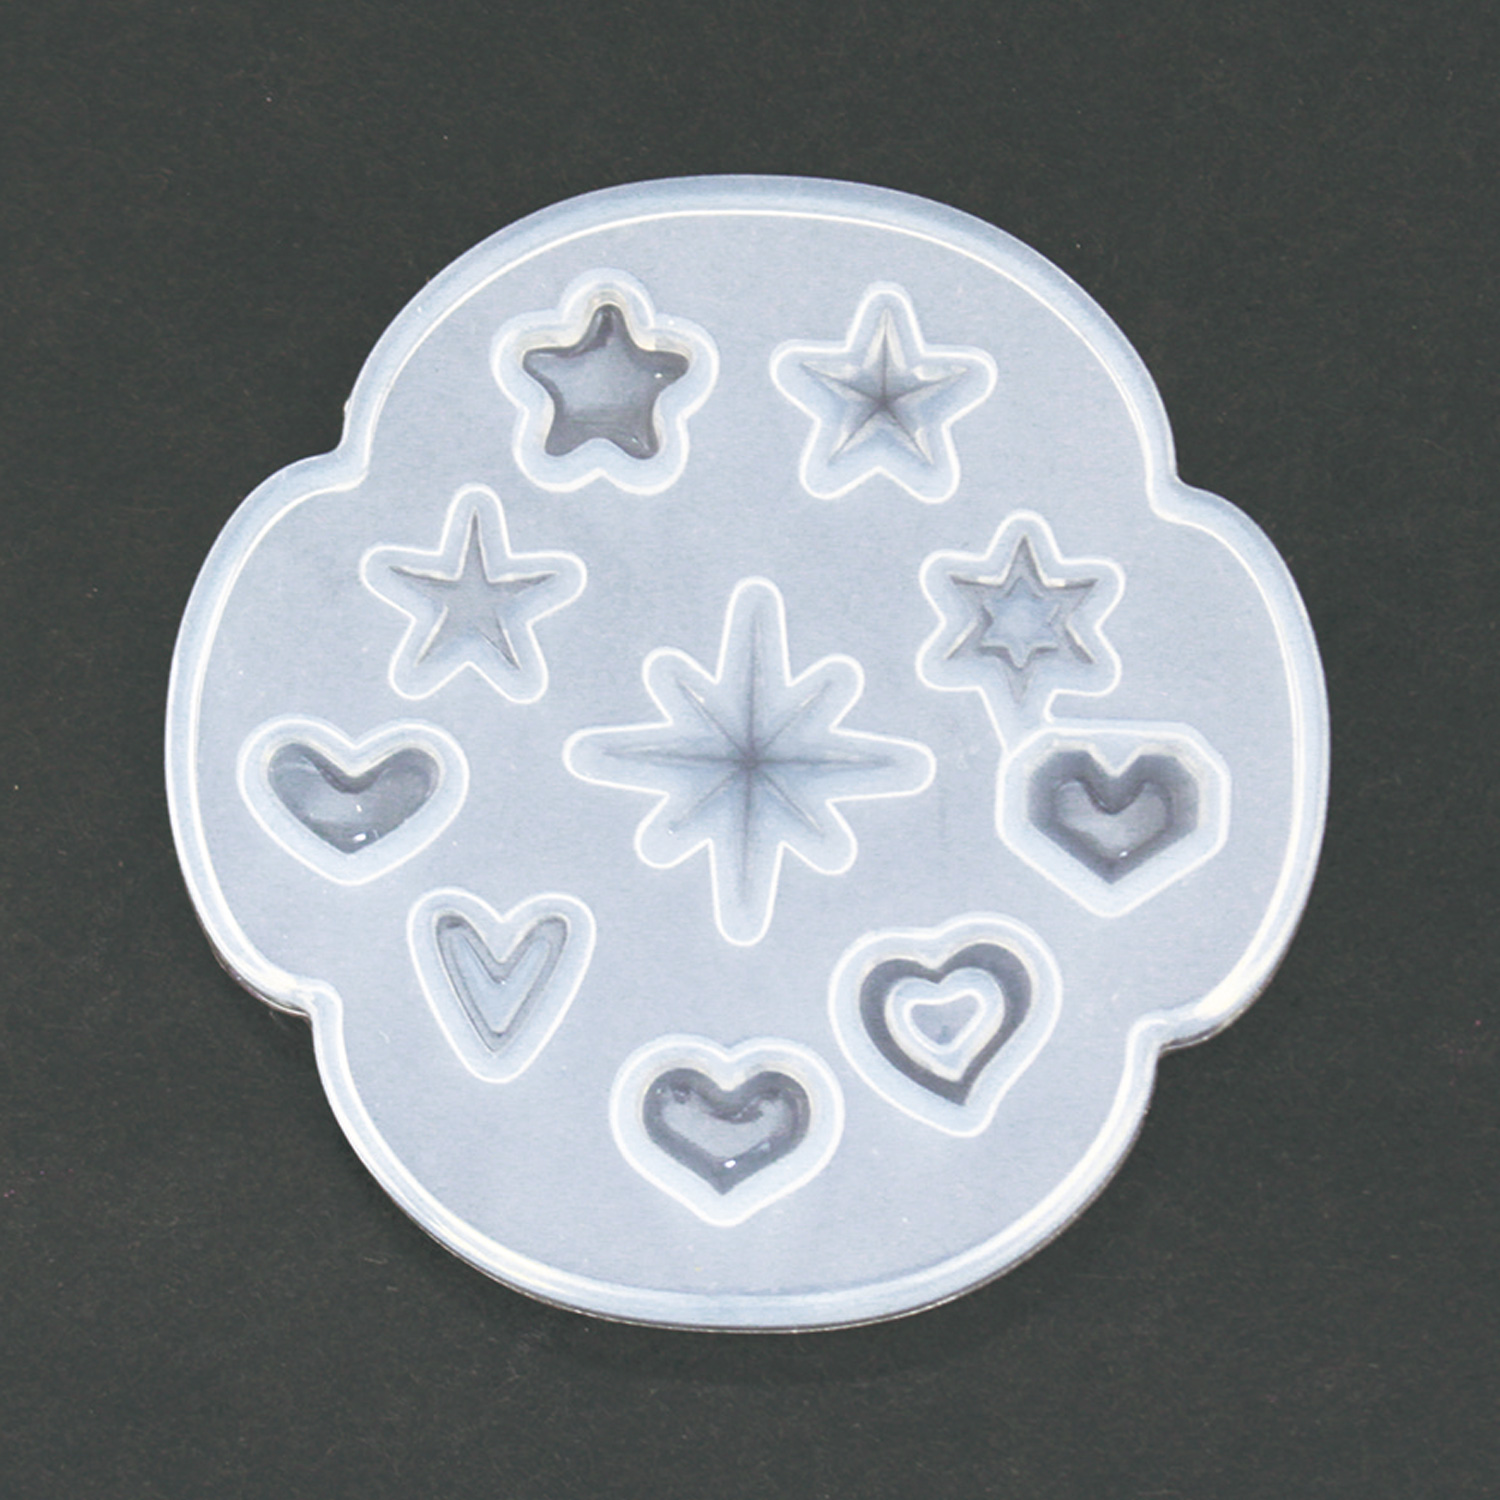 T10-2365　Silicone Mold , Star and Hearts　1pcs　(pcs)